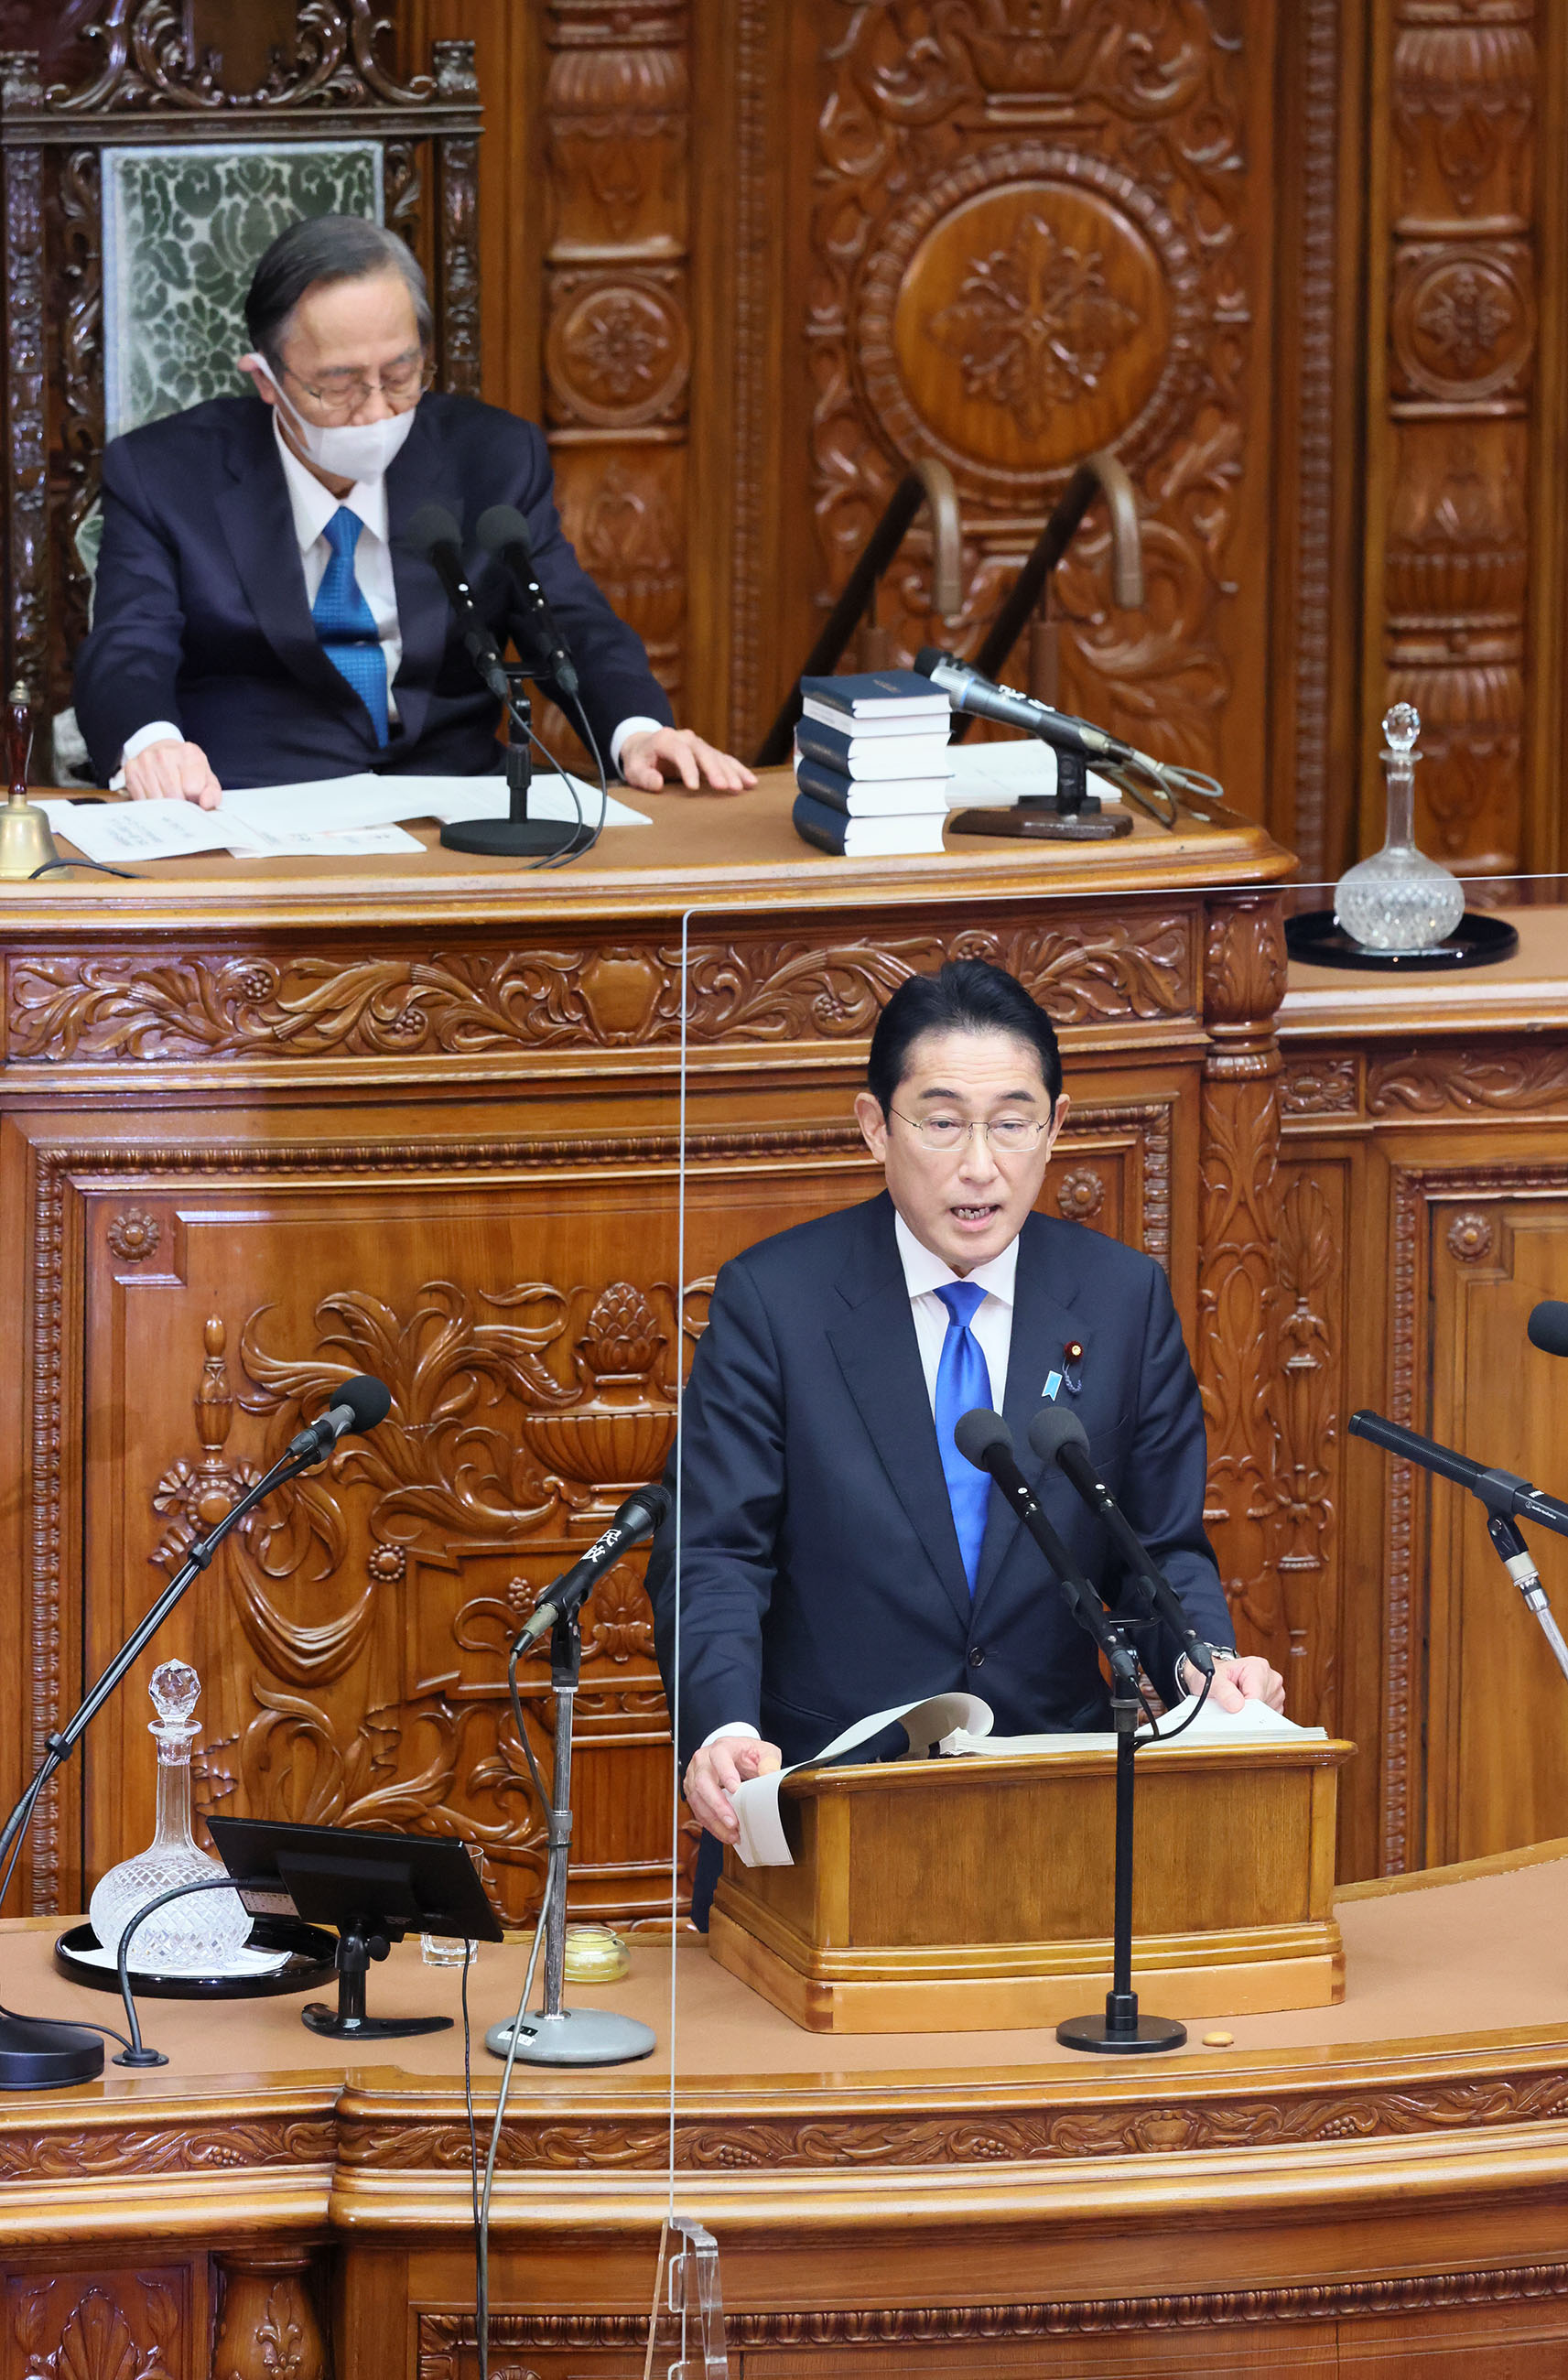 Prime Minister Kishida delivering a policy speech during the plenary session of the House of Representatives (3)